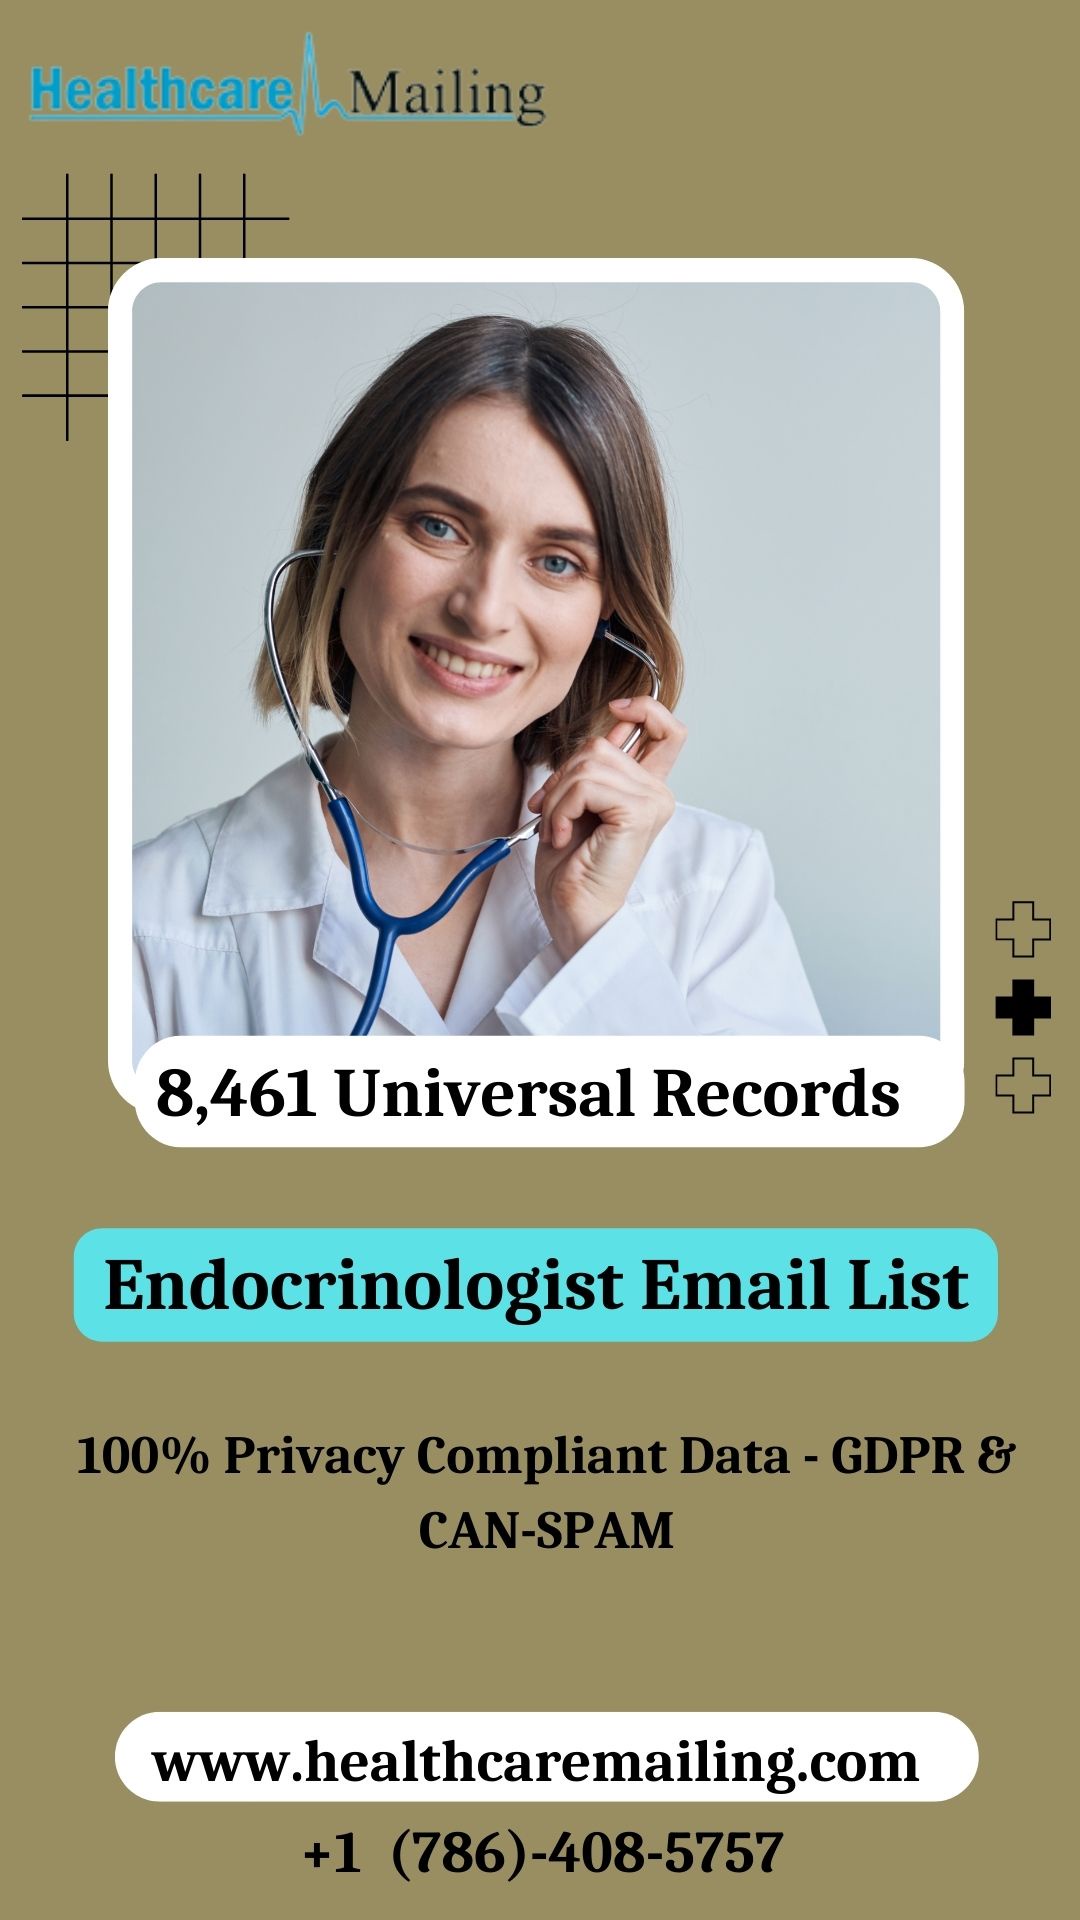 What are the benefits of an endocrinologist email list in email marketing?